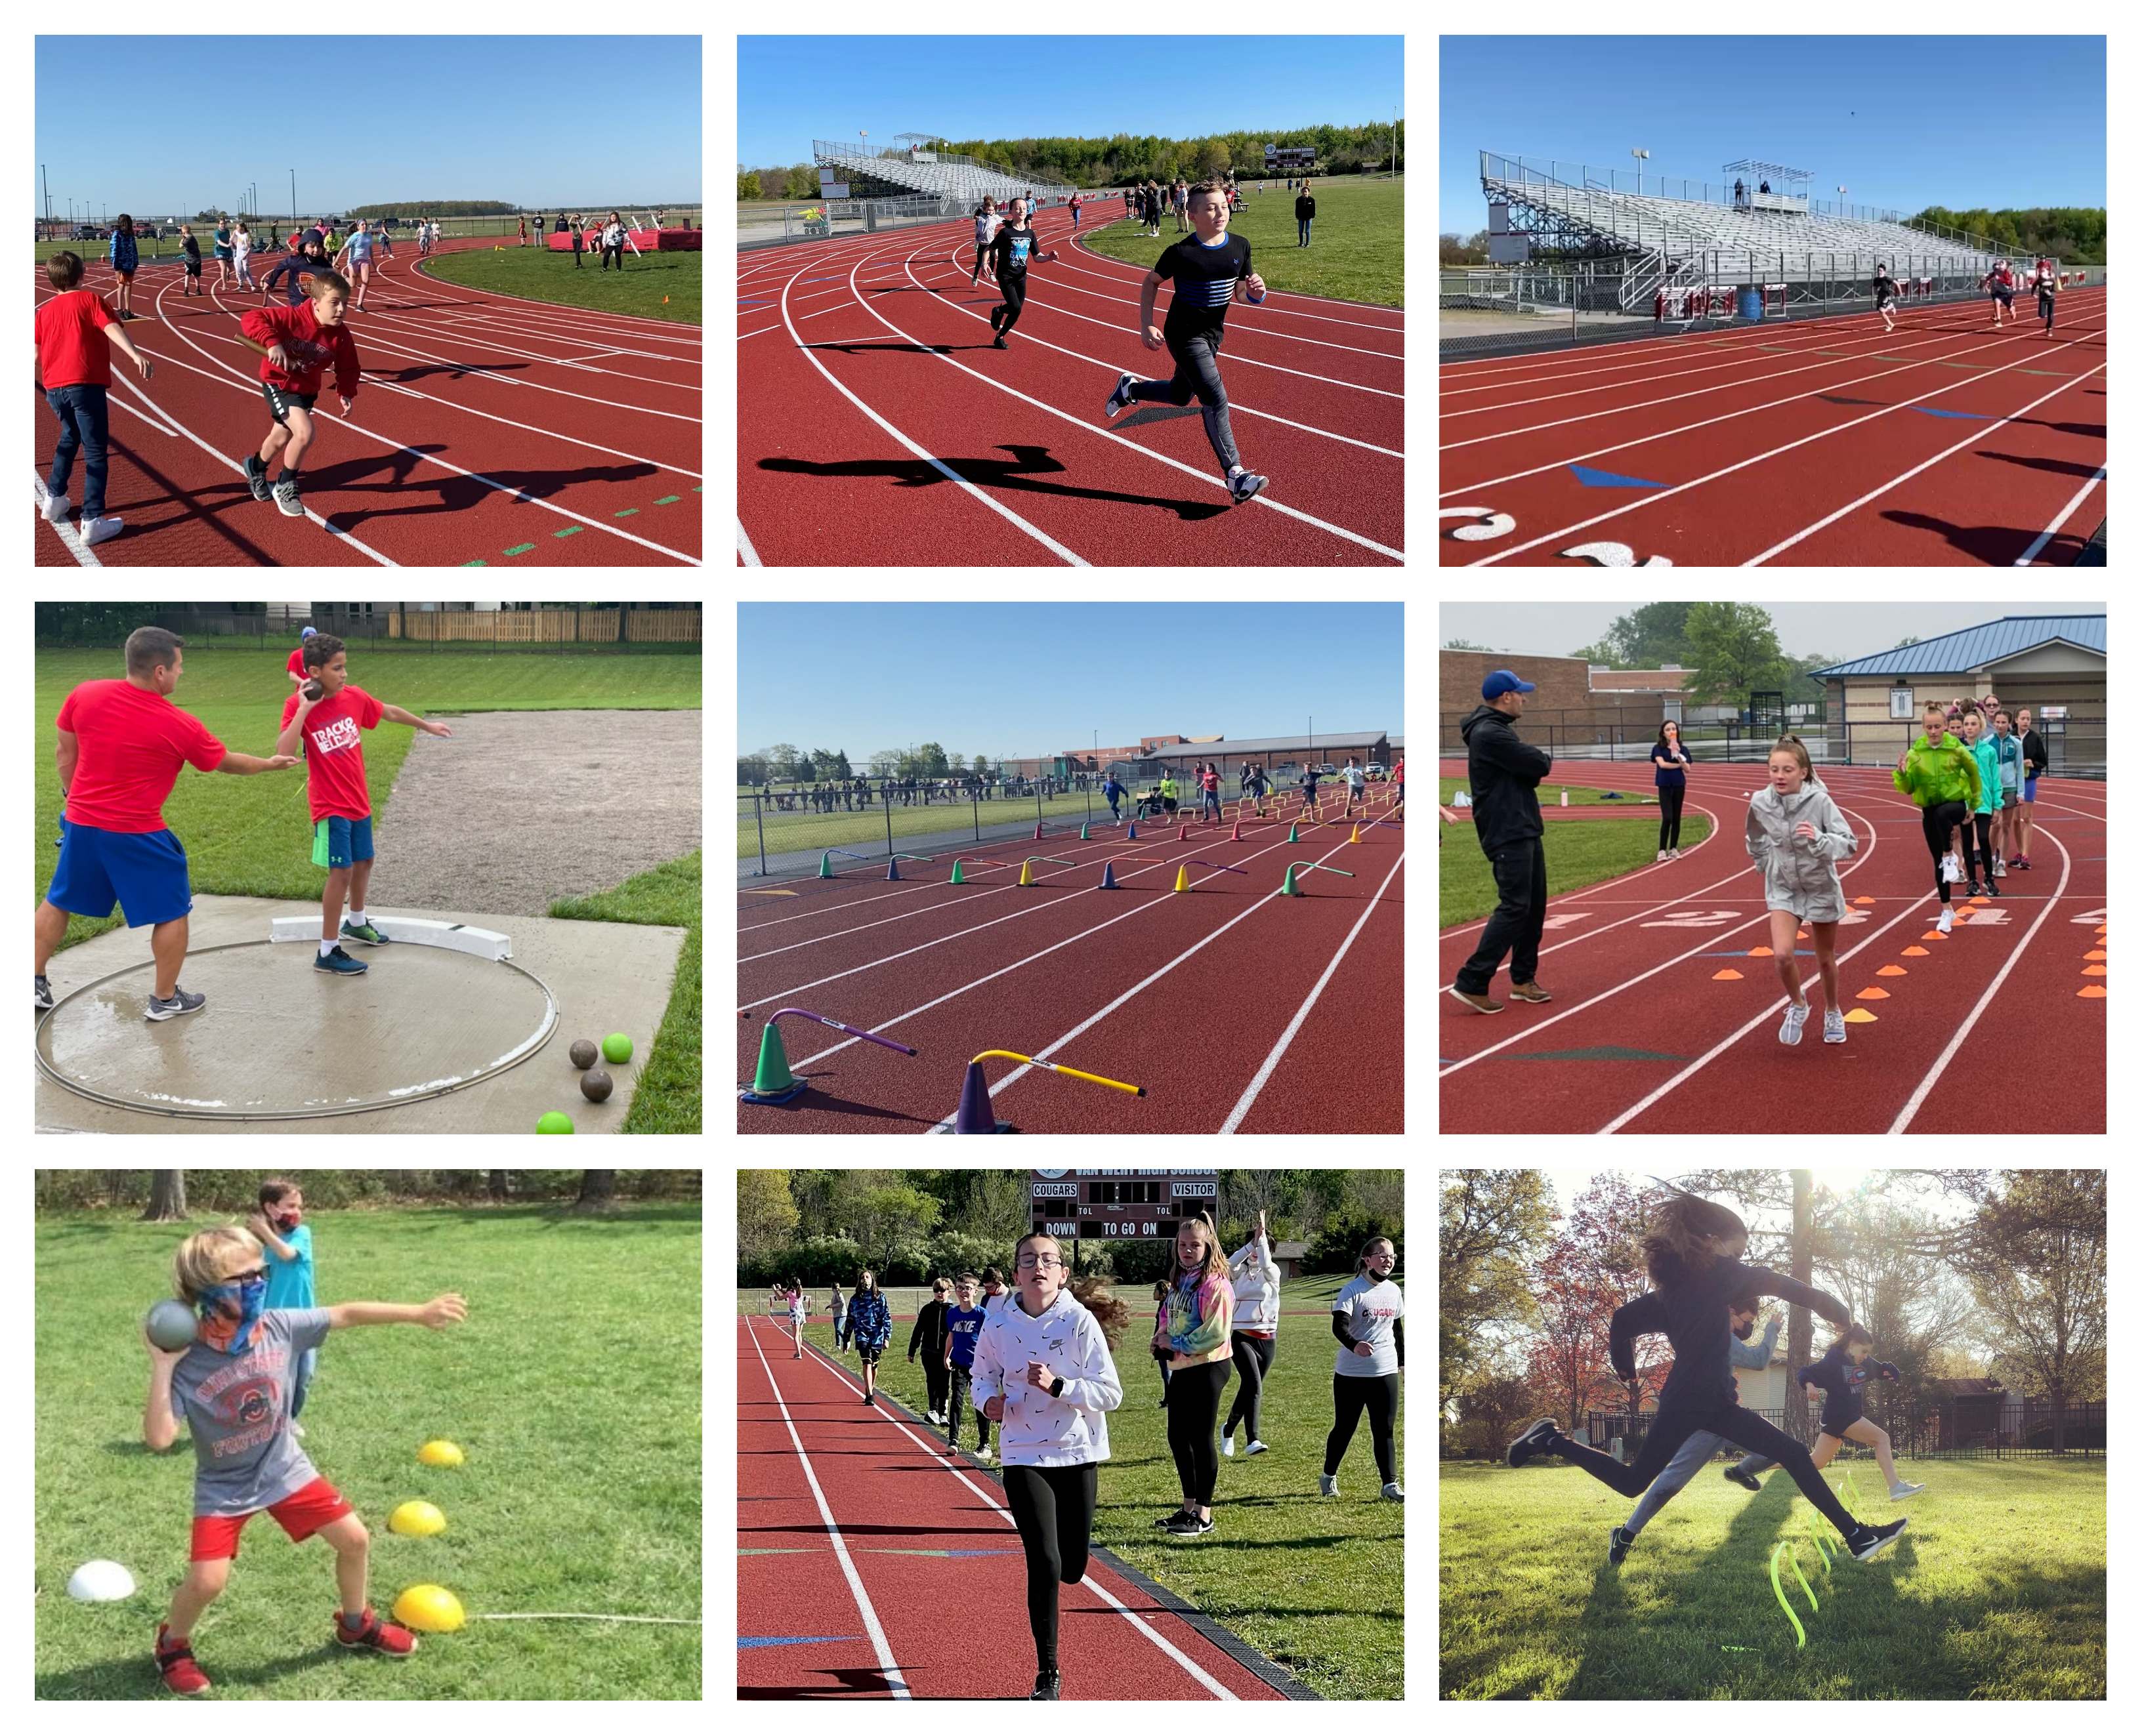 Grassroots Track and Field Day